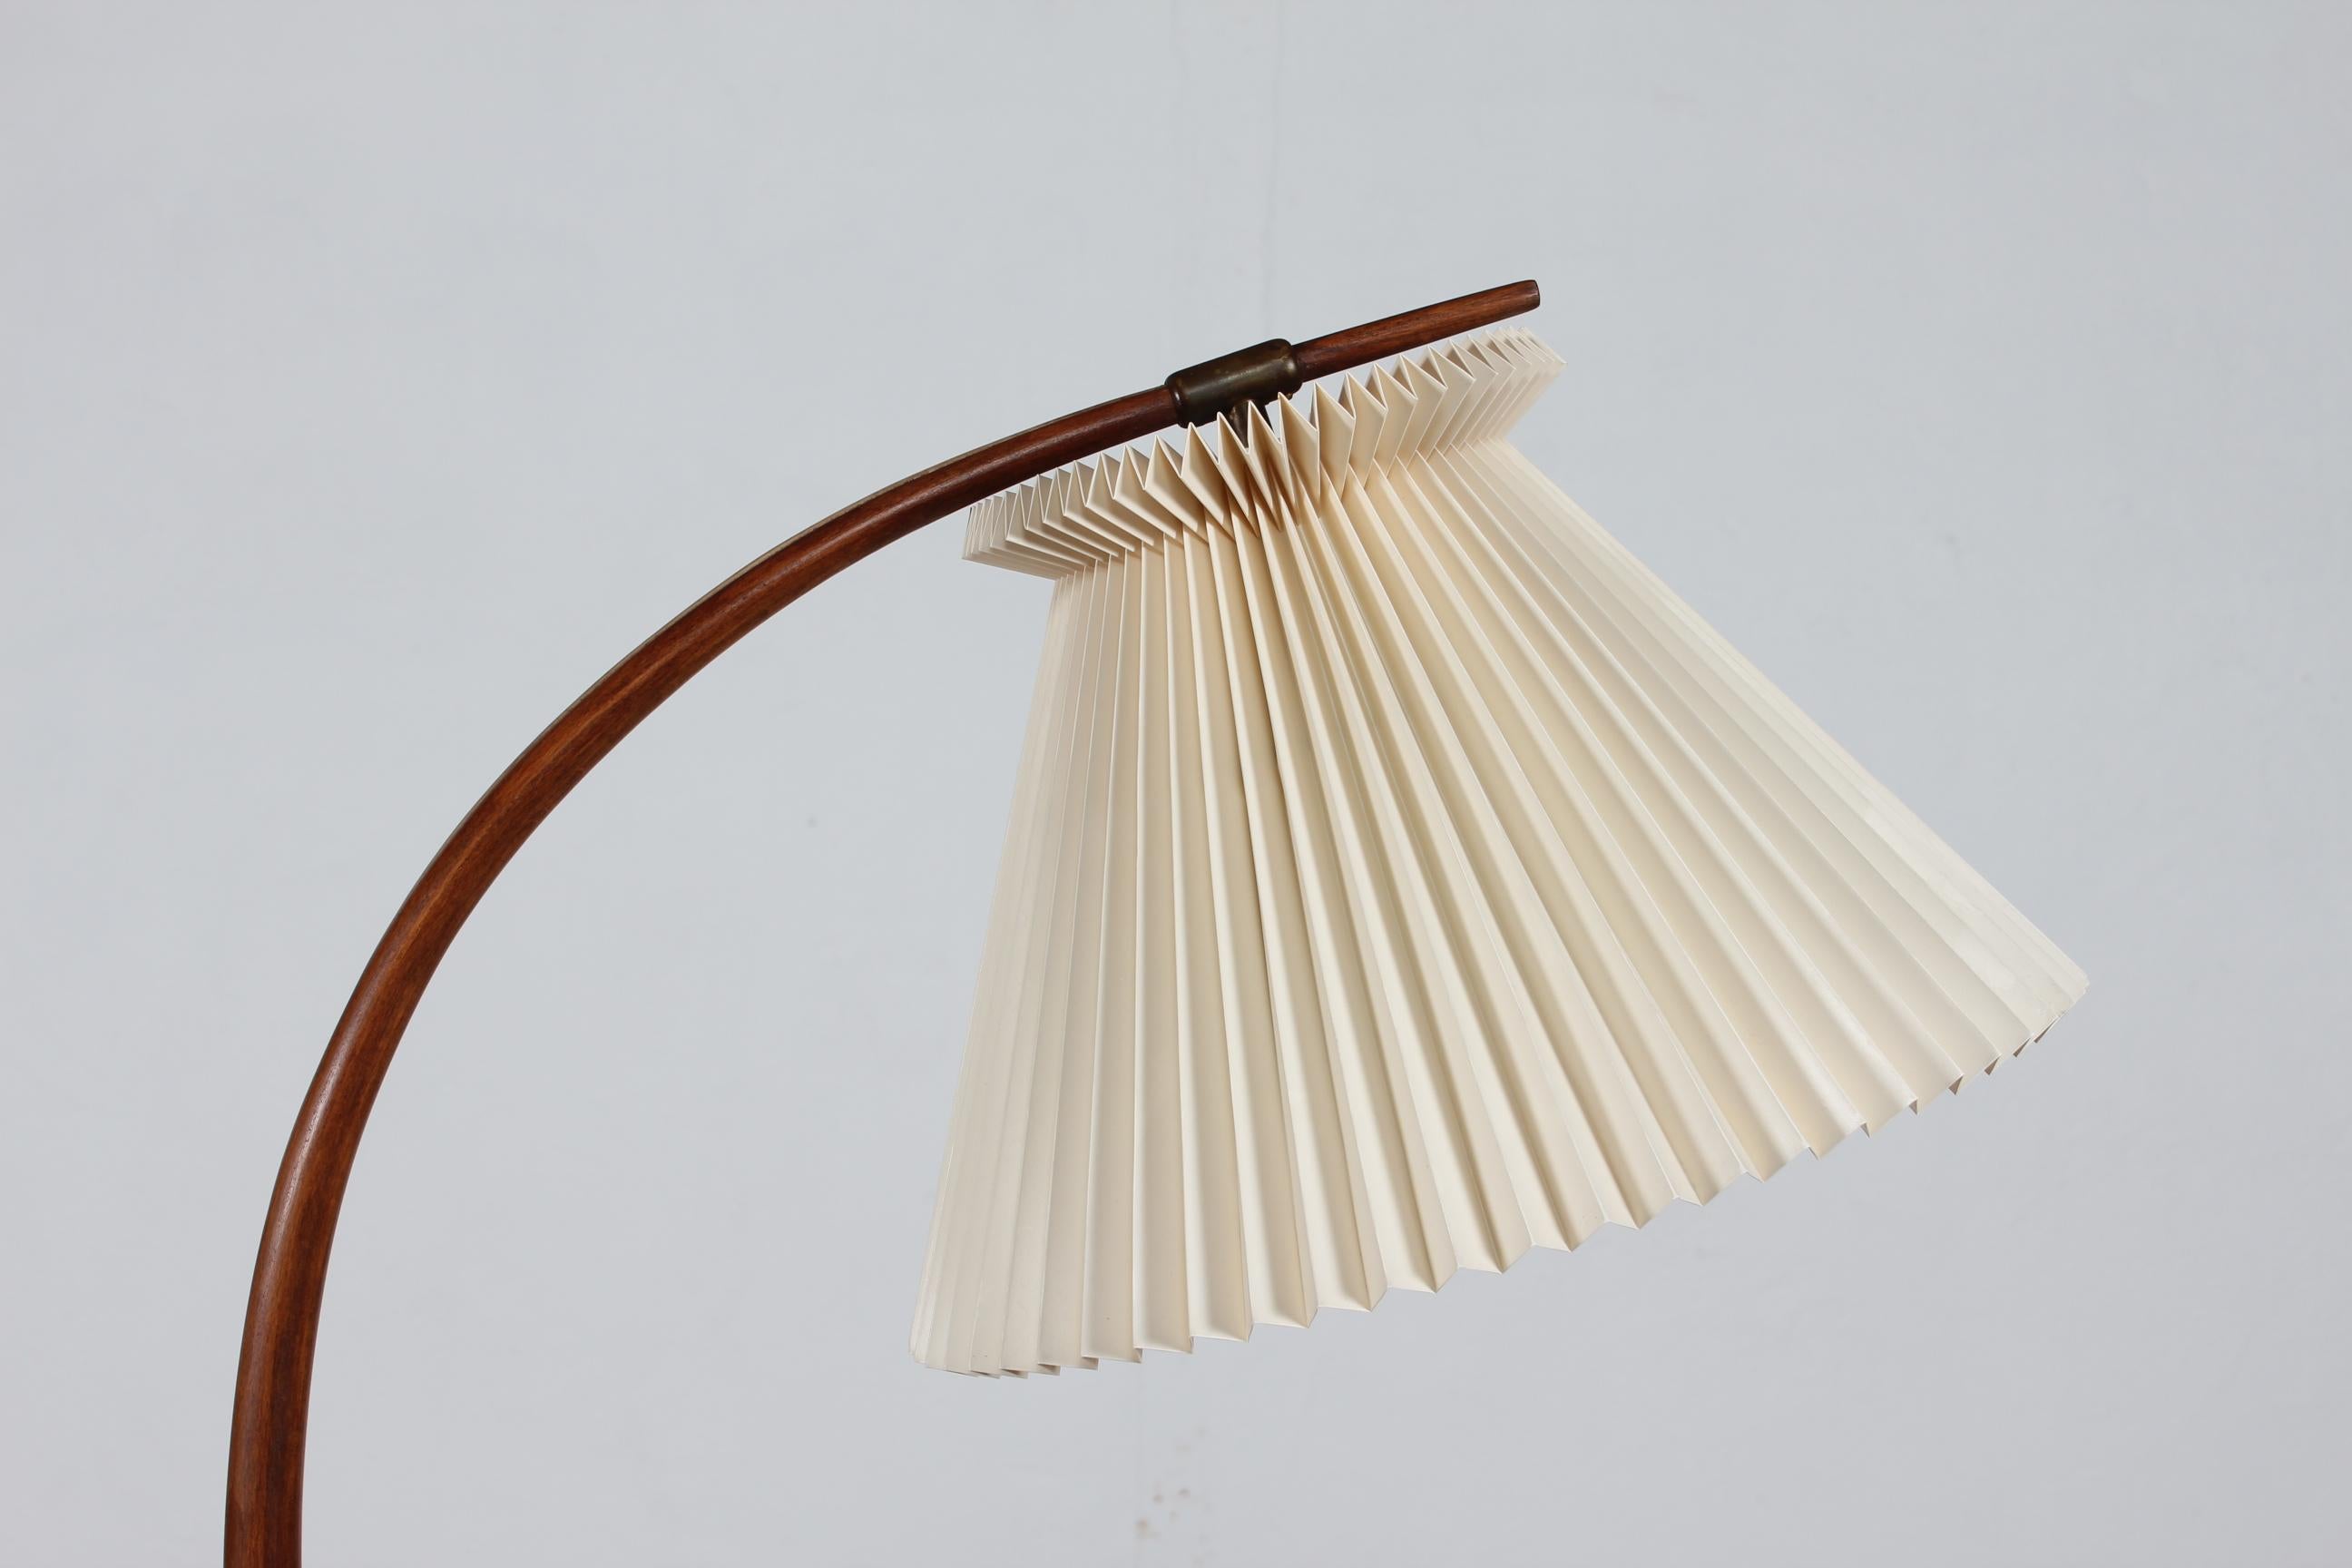 Severin Hansen Jr. tripod brige floor lamp made by Haslev Møbelsnedkeri in Denmark in the 1950s
The lamp base is made of stained beech with brass fittings mounted with the original hand folded Le Klilnt lamp shade.
The switch is placed between the